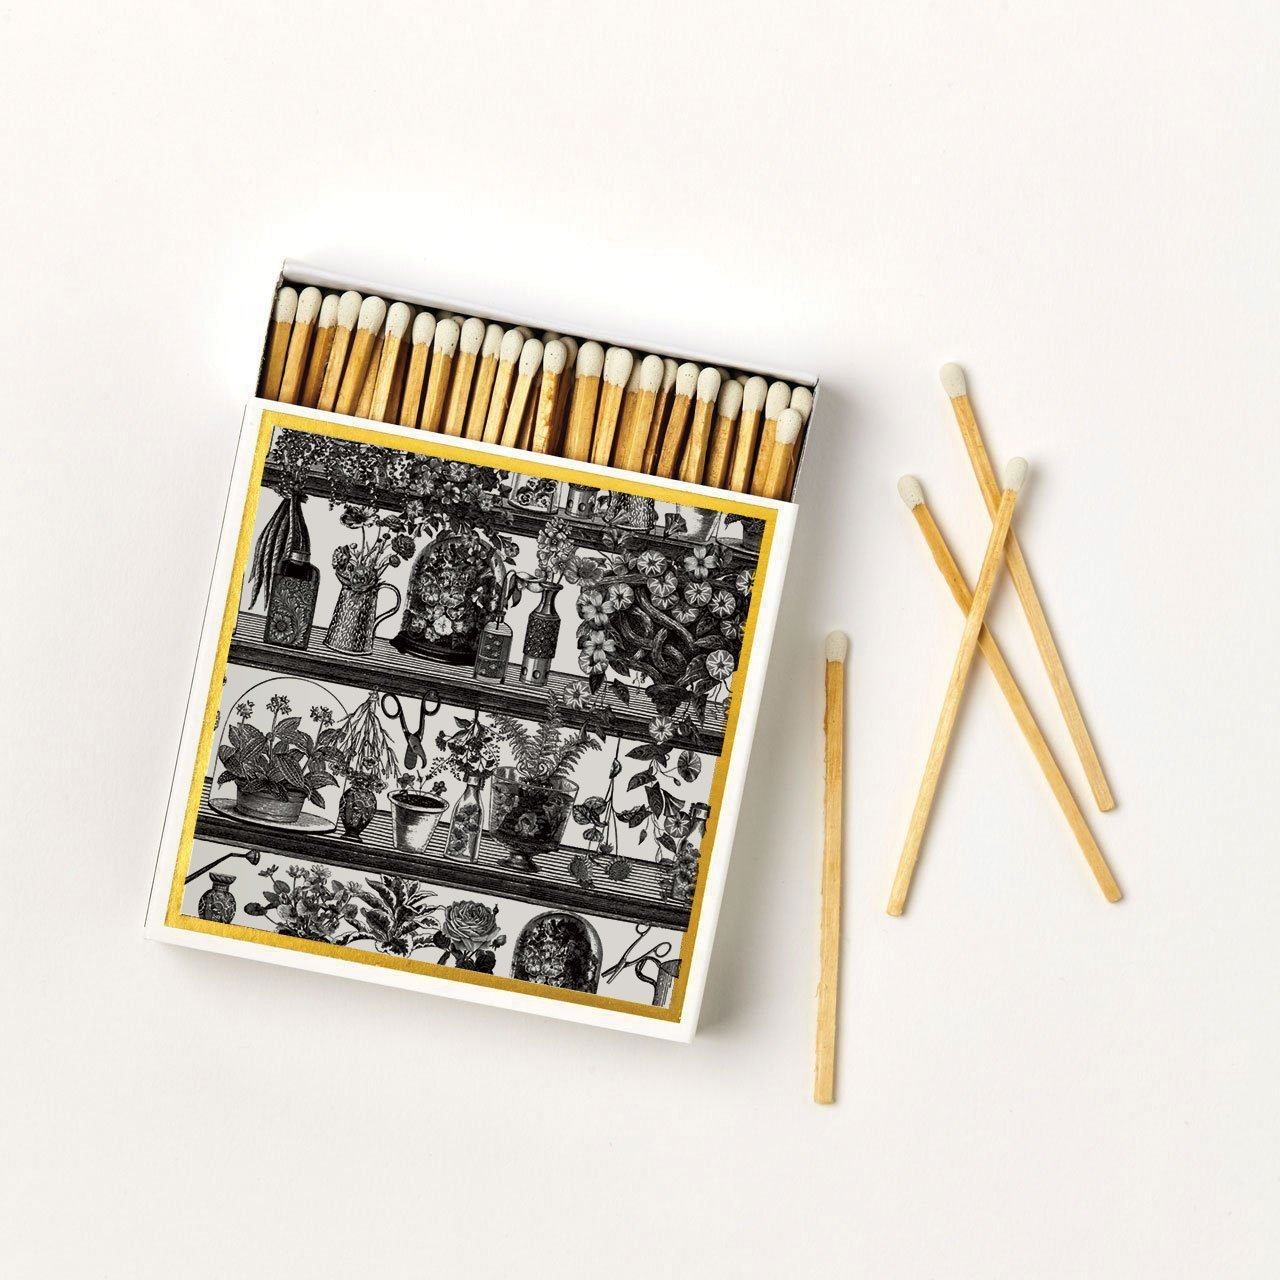 Luxury Matches  candle collective UK